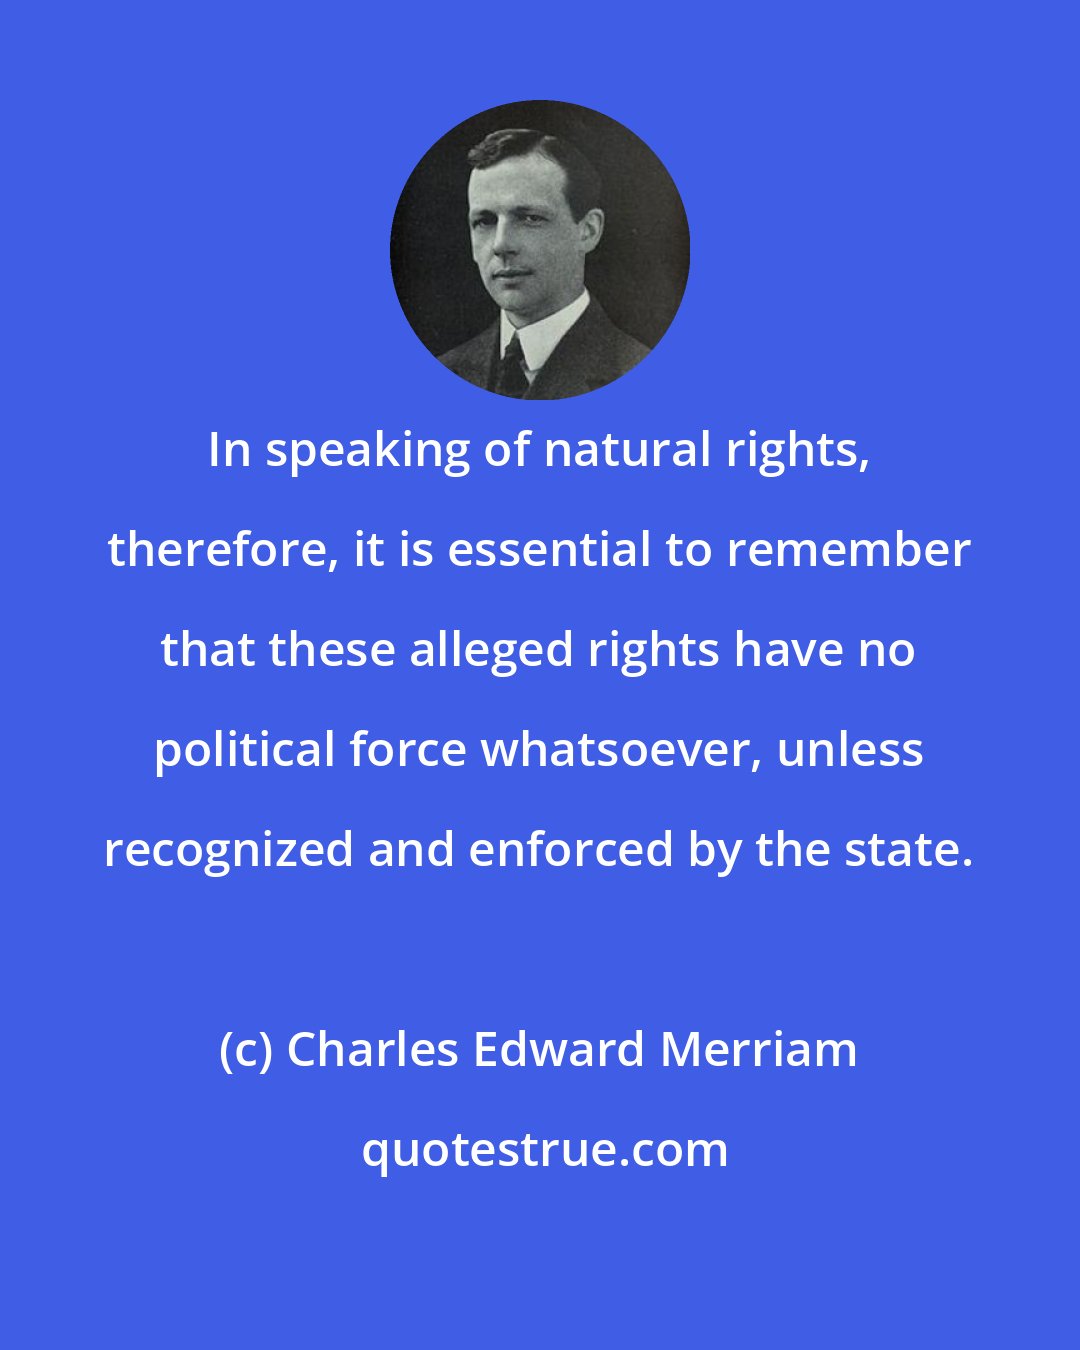 Charles Edward Merriam: In speaking of natural rights, therefore, it is essential to remember that these alleged rights have no political force whatsoever, unless recognized and enforced by the state.